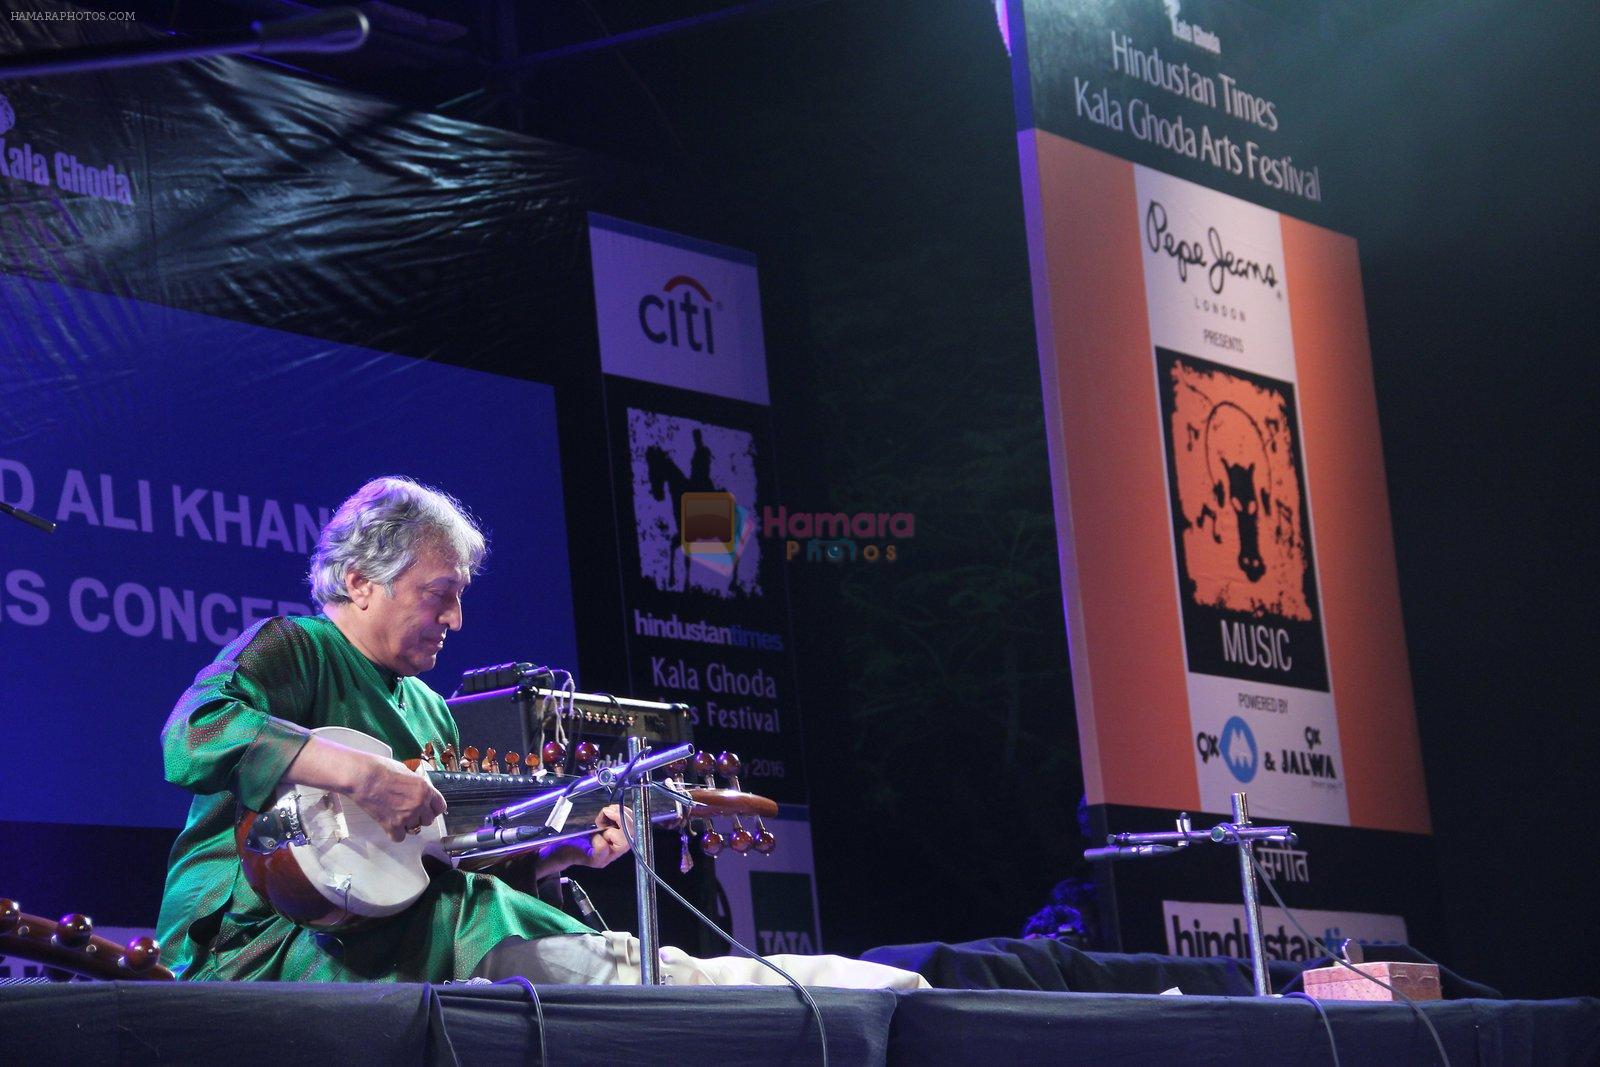 Amjad Ali Khan at Kala Ghoda festival with Pepe Jeans concert Ayan Amaan Ali on 7th Feb 2016